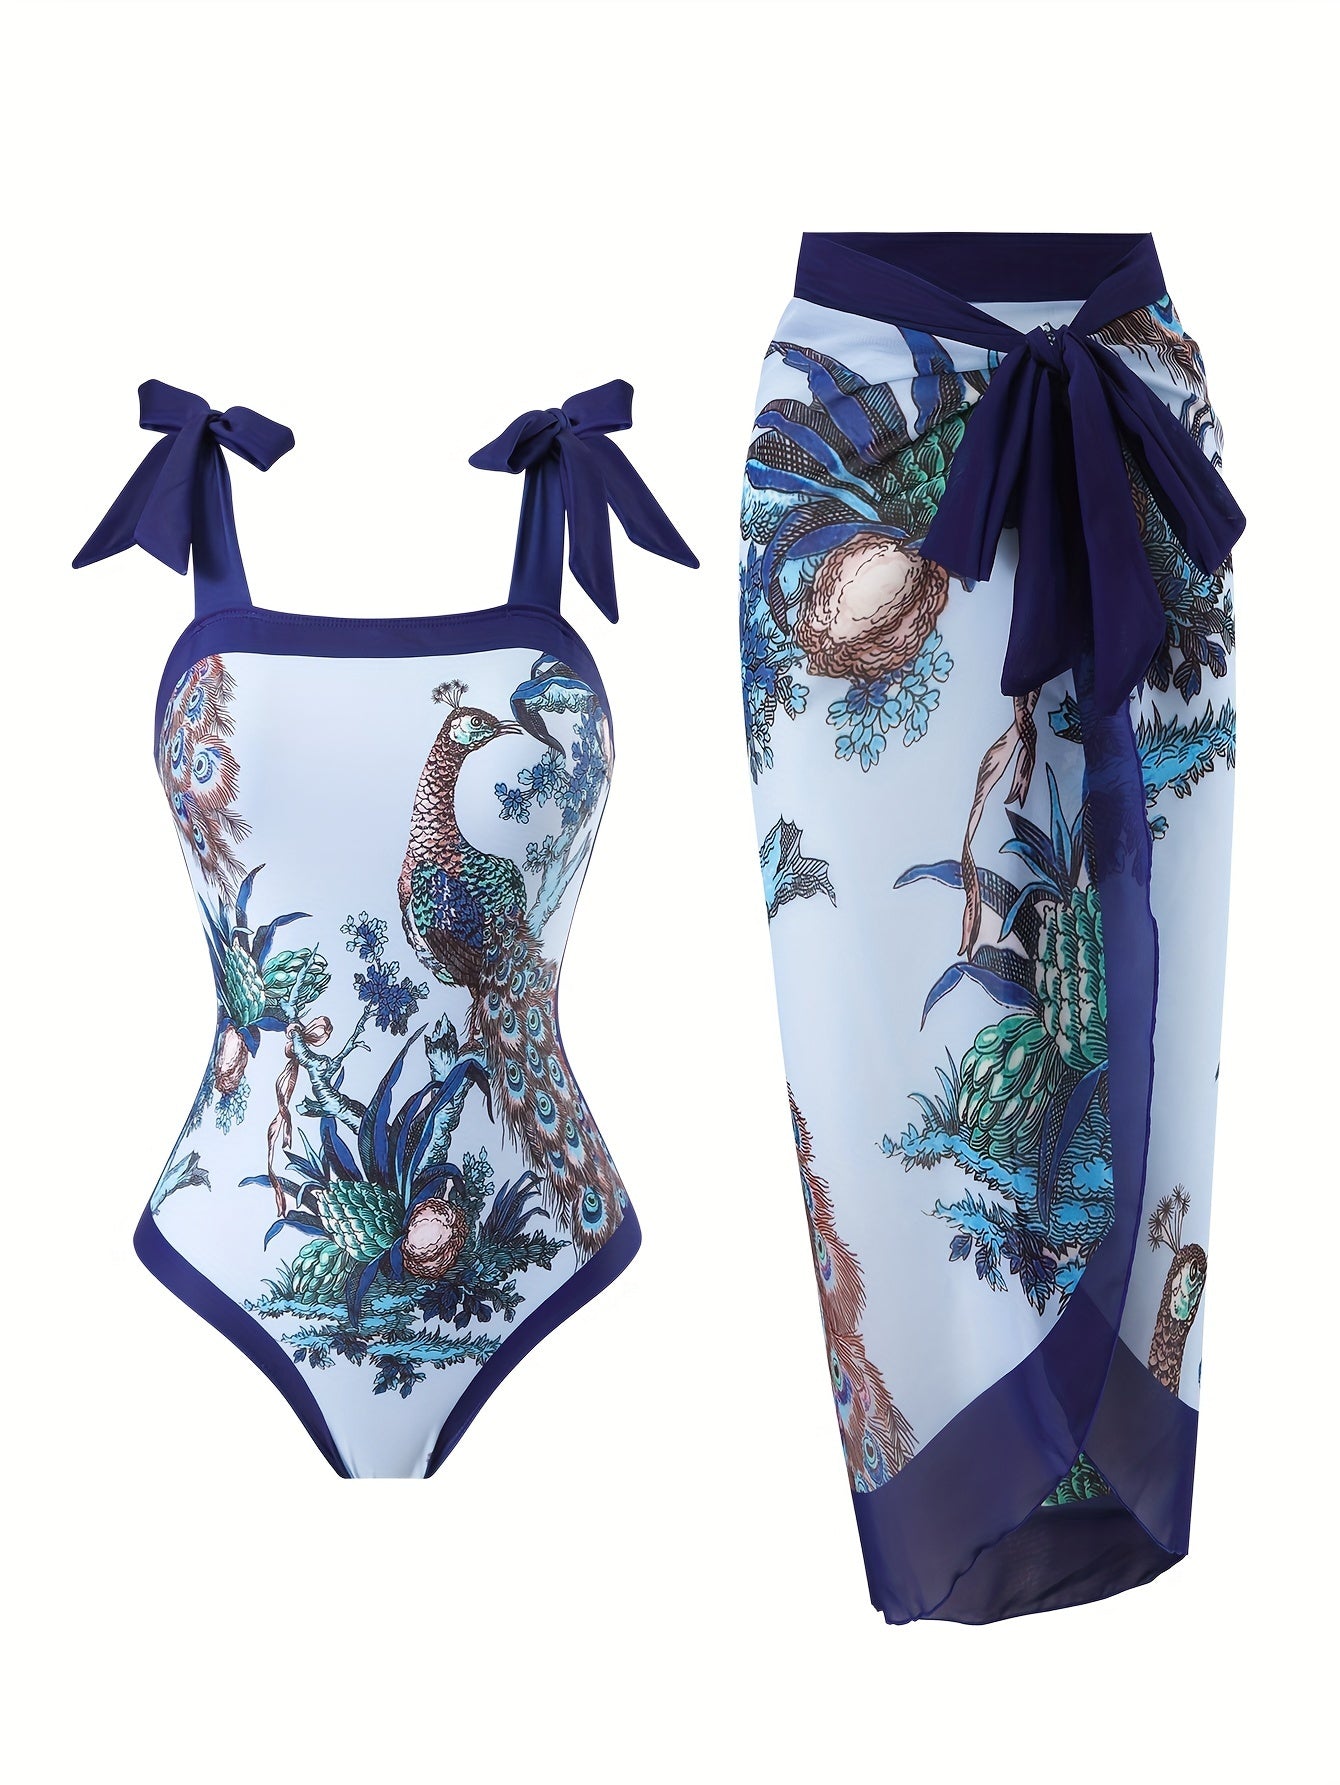 Peacock & Plant Graphic 2 Piece Swimsuits, Bow Tie Shoulder Straps Tummy Control One-piece Bathing-suit & Cover Up Skirt, Women's Swimwear & Clothing For Holiday